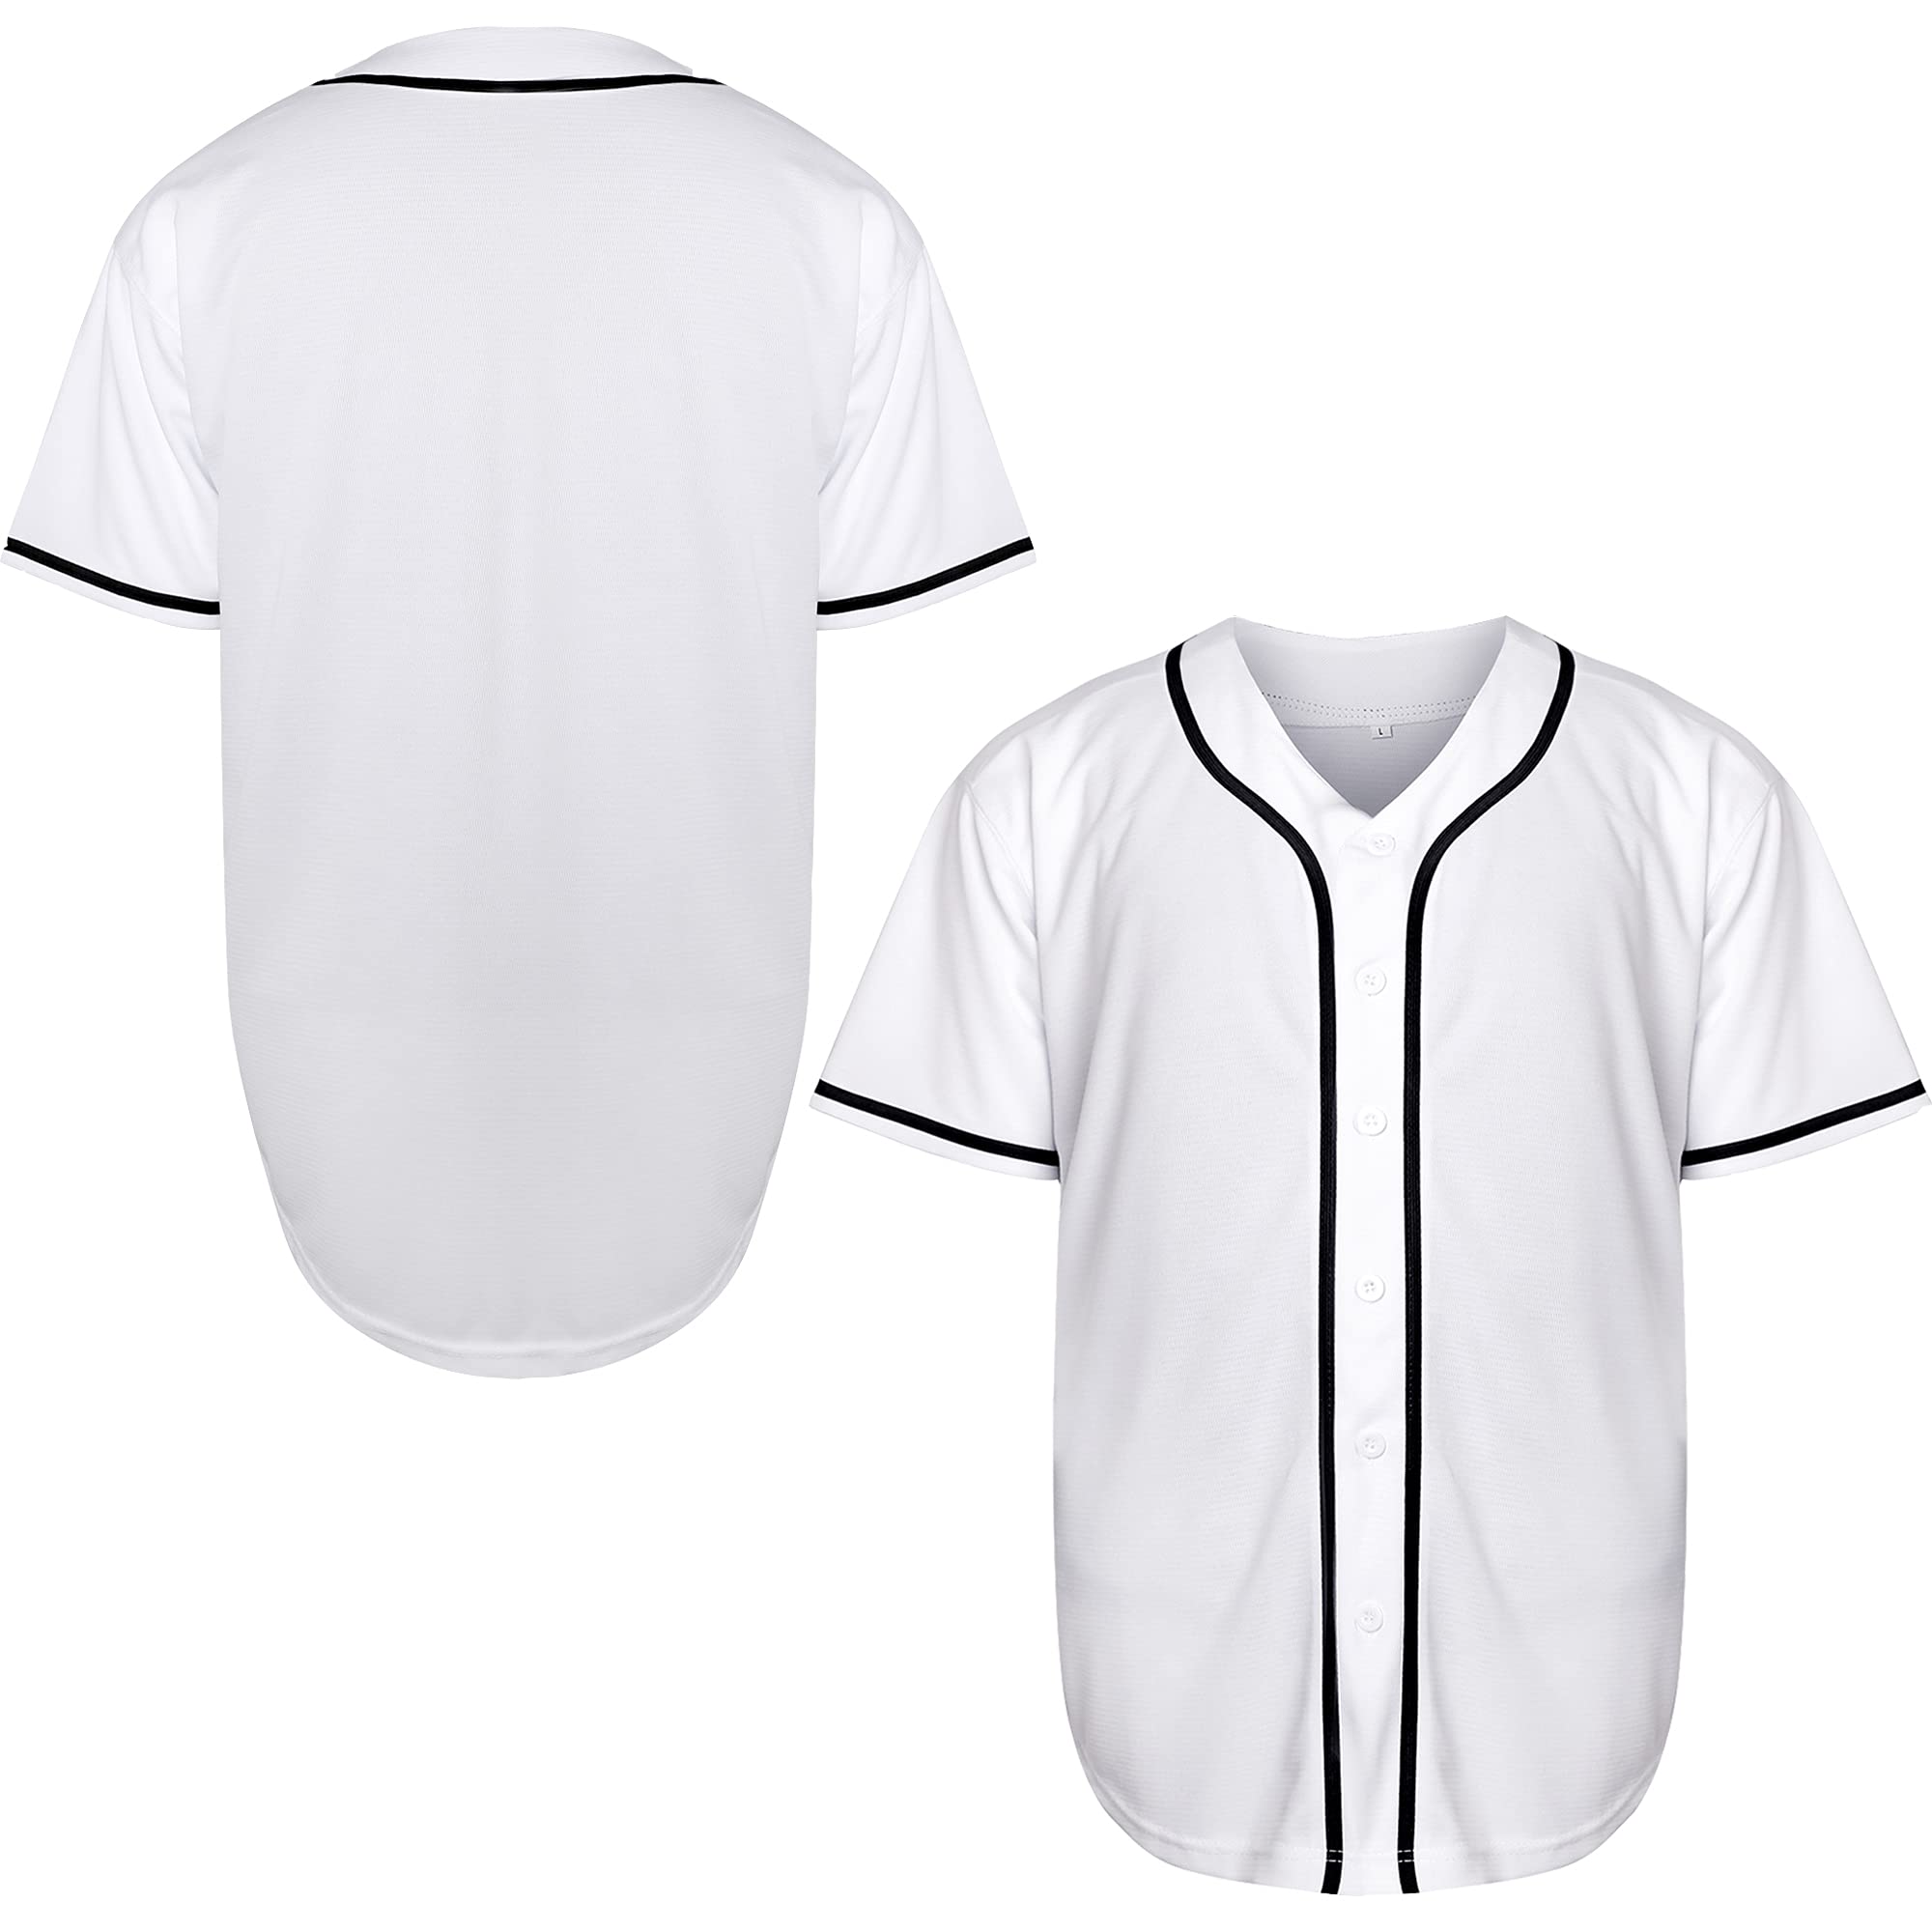 MNMN Blank Jersey Plain Hipster Hip Hop for Men Button-Down Baseball Jersey  Short Sleeve Shirt White Black Red Grey S-3XL (Blank Red, Small)